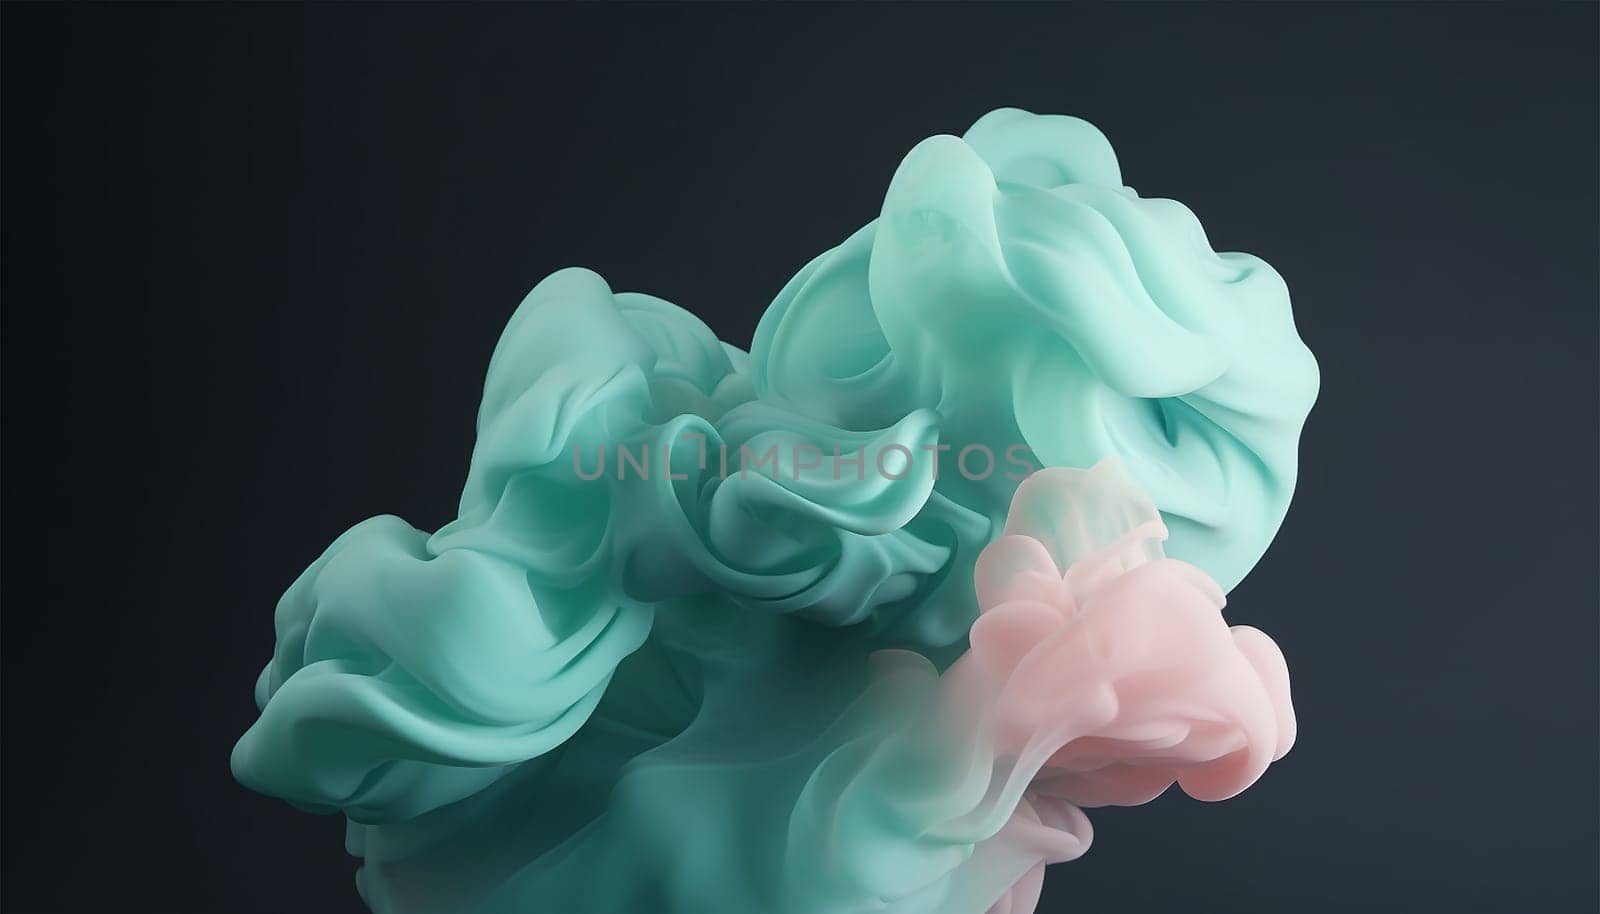 Realistic 3D smoke cloud pastel colored green and pink. 3d realistic clouds set isolated on a dark background. Render soft round cartoon fluffy clouds icon in the sky. 3d geometric shapes illustration Cute